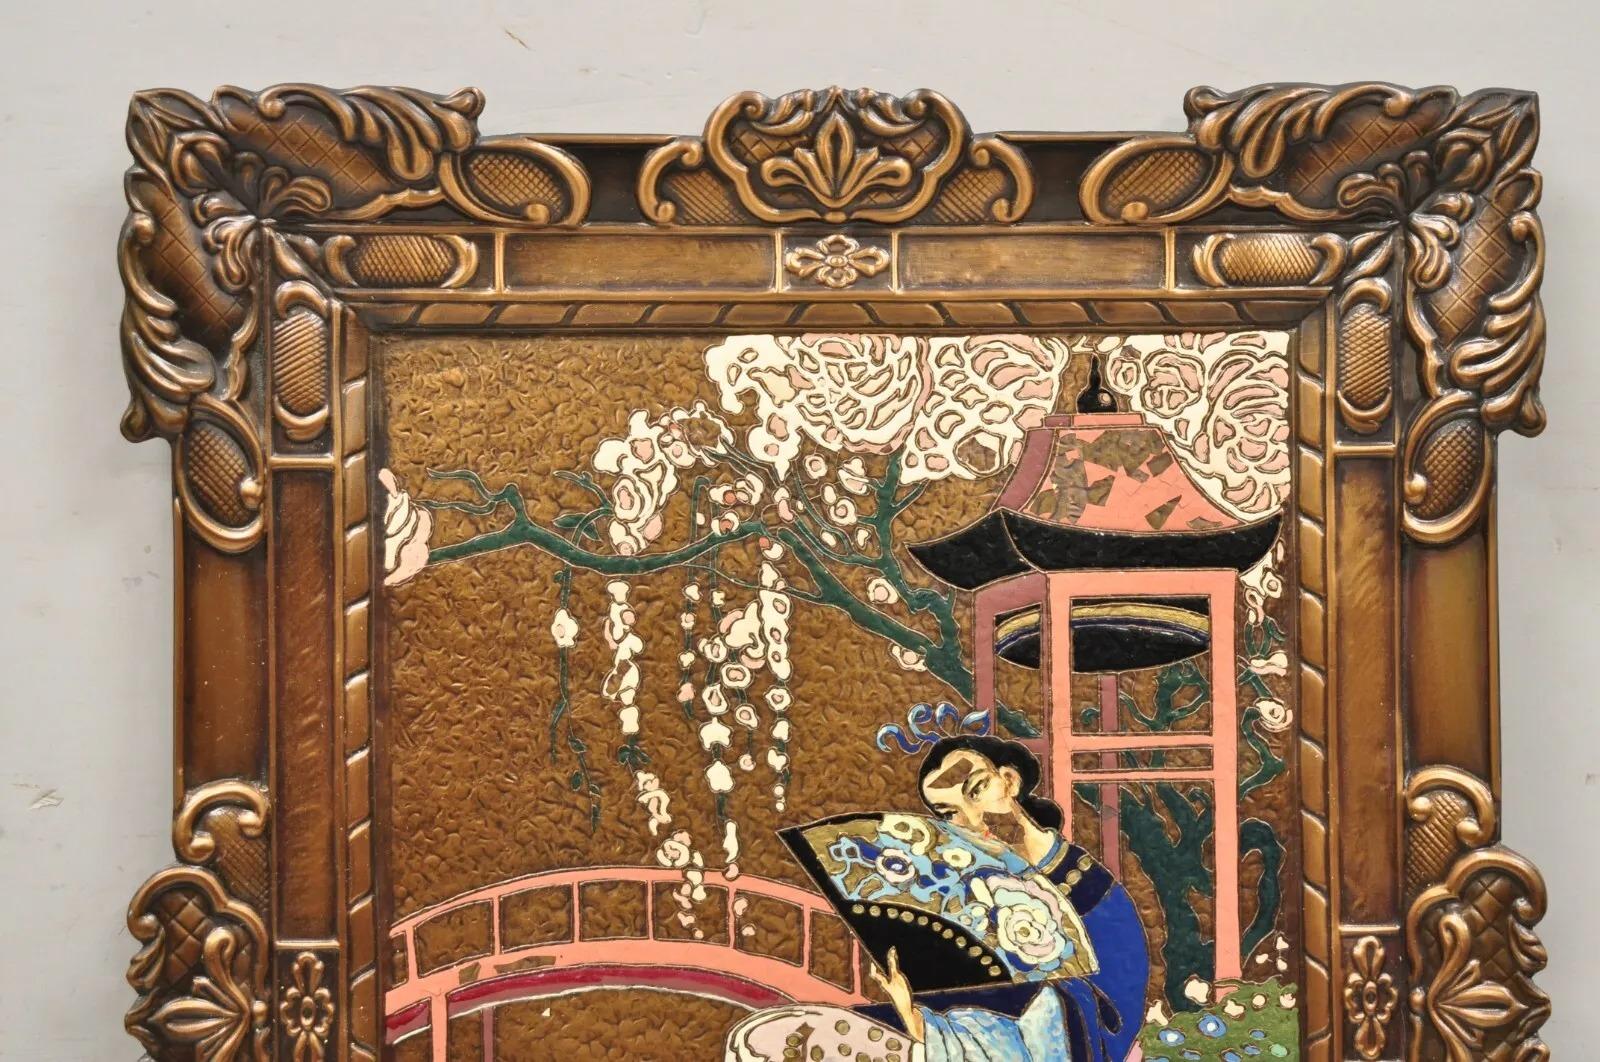 Anglo-Japanese Vintage Painted Copper Metal Relief Art By A Gilles 26”x 20” Japanese Sakura For Sale